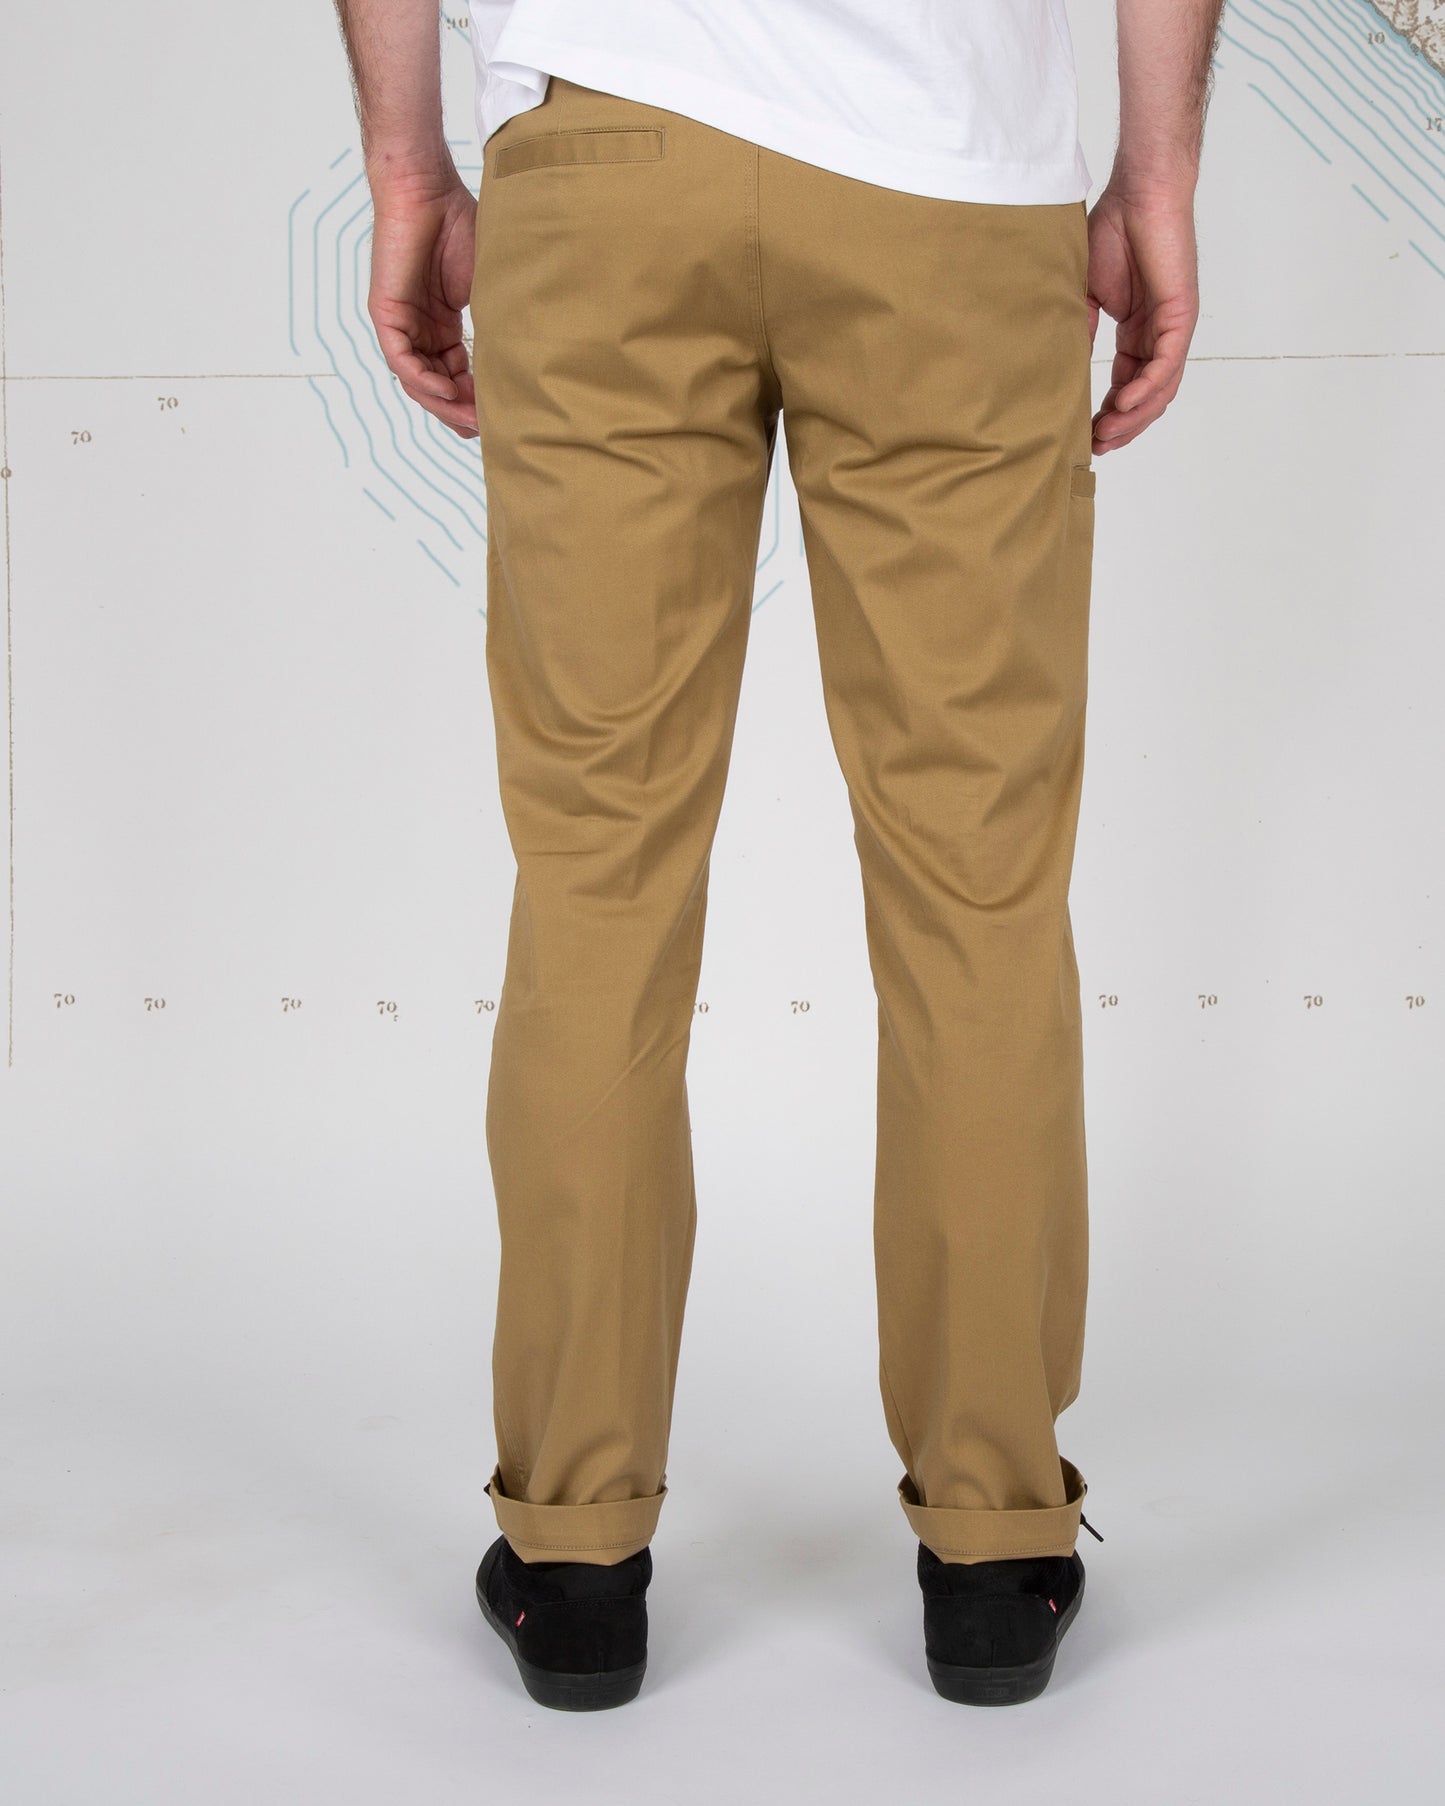 On body back of Deckhand Workwear Brown Chino Pant